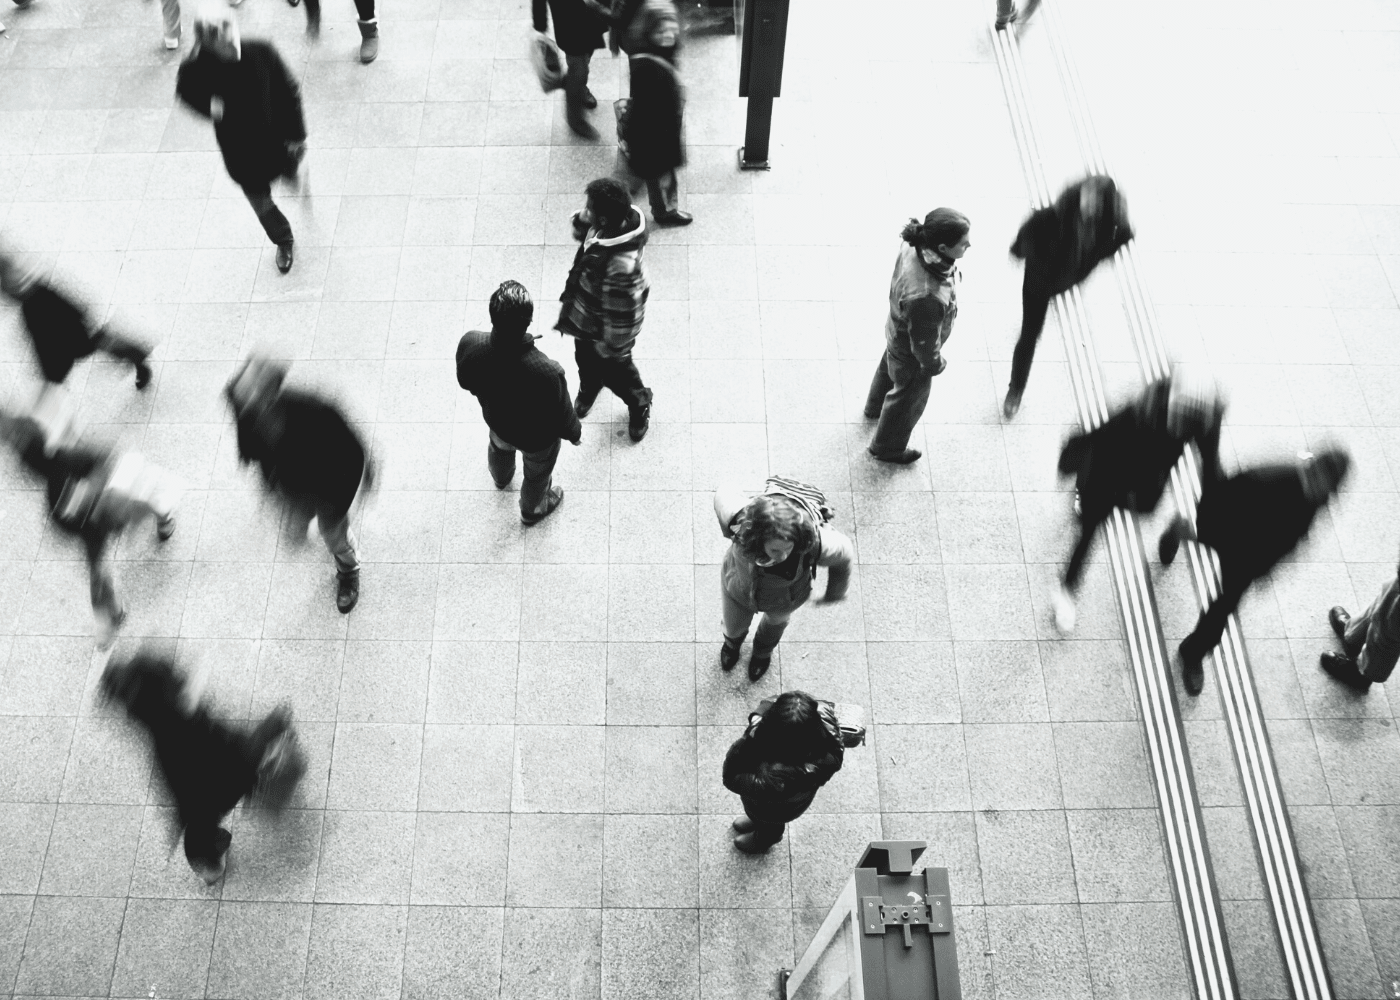 People waking quickly in different directions with a blur photo effect